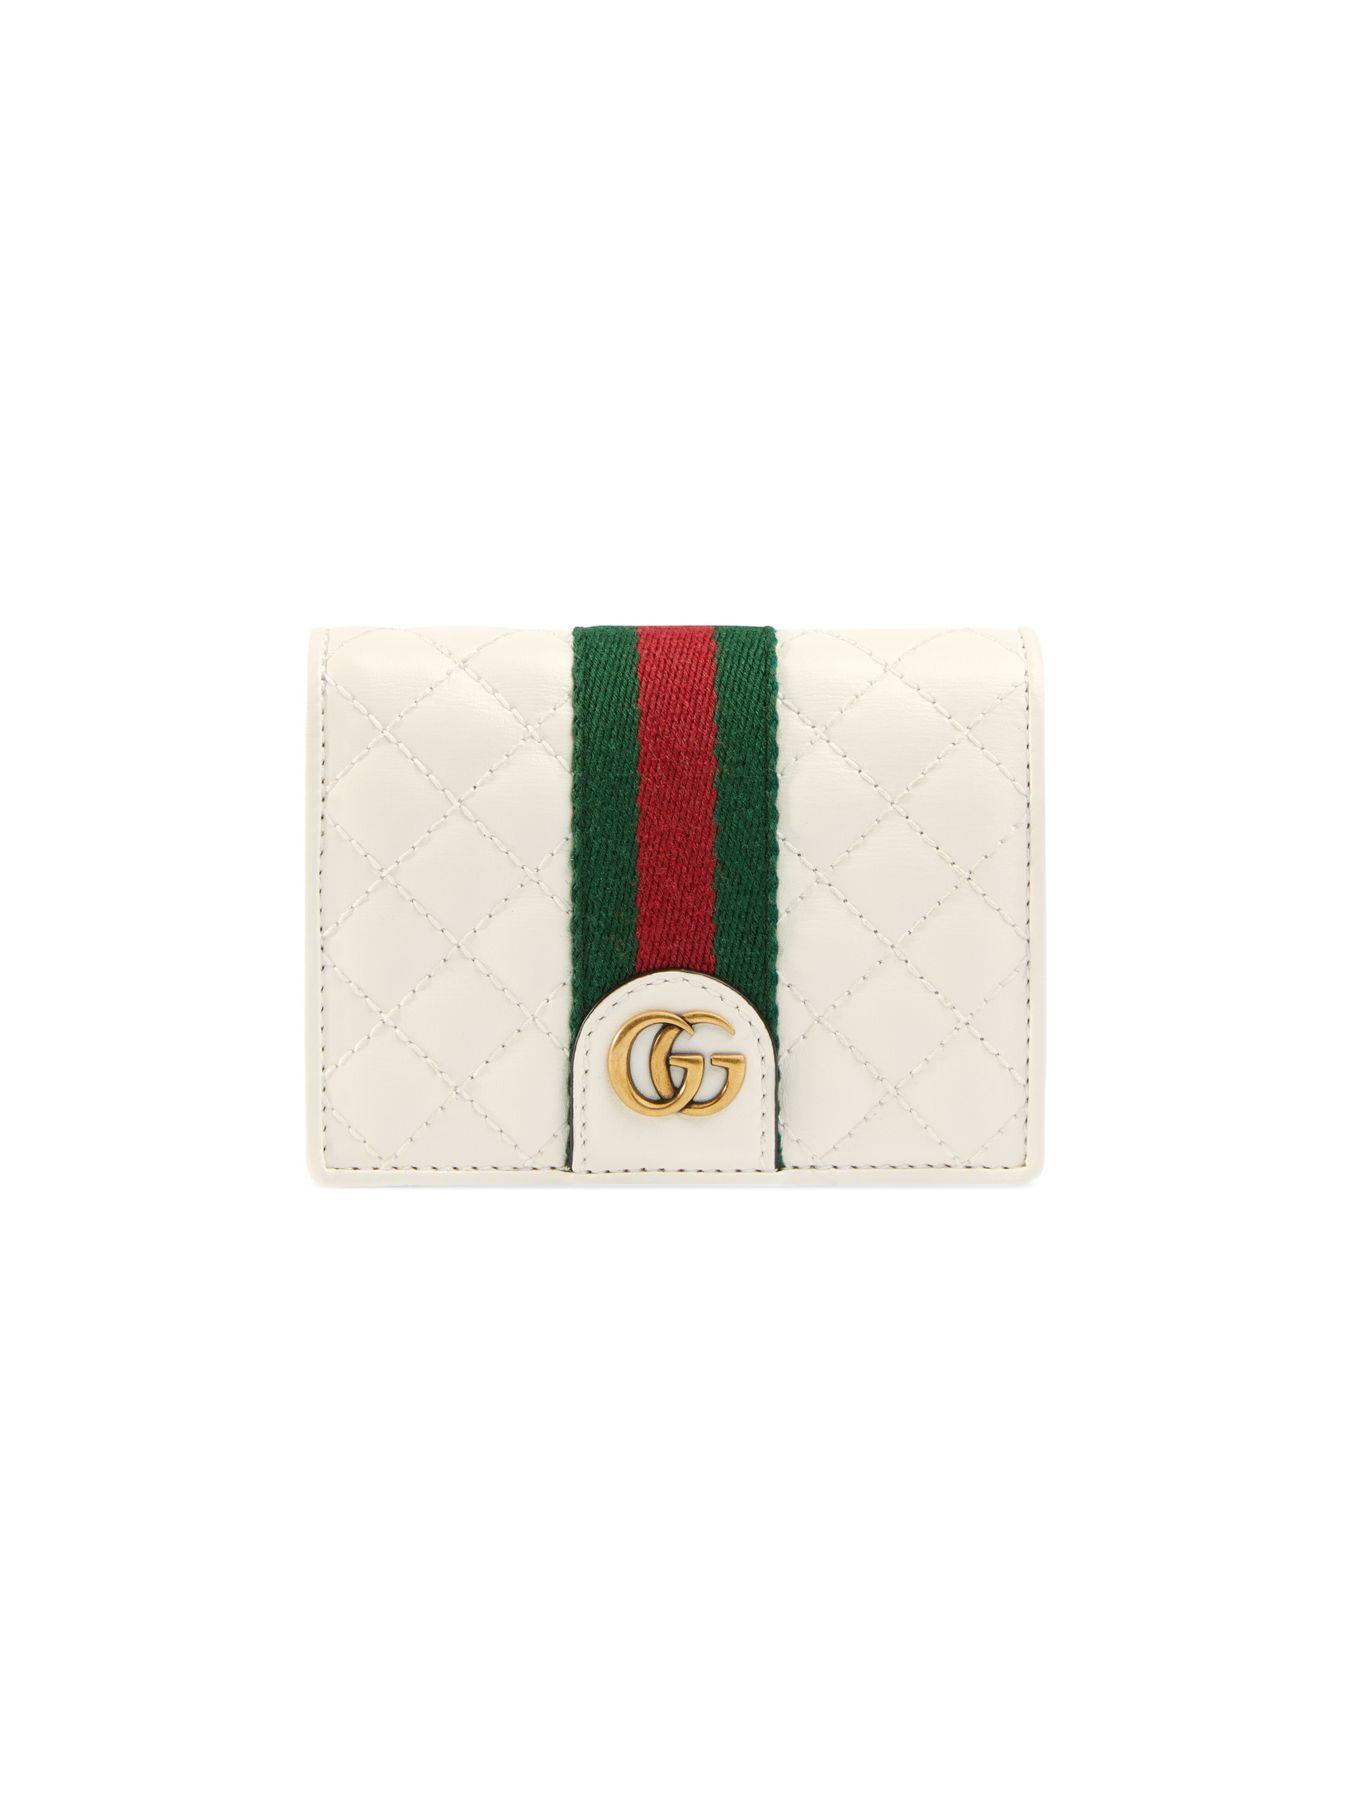 Gucci Trapuntata Leather Wallet in 